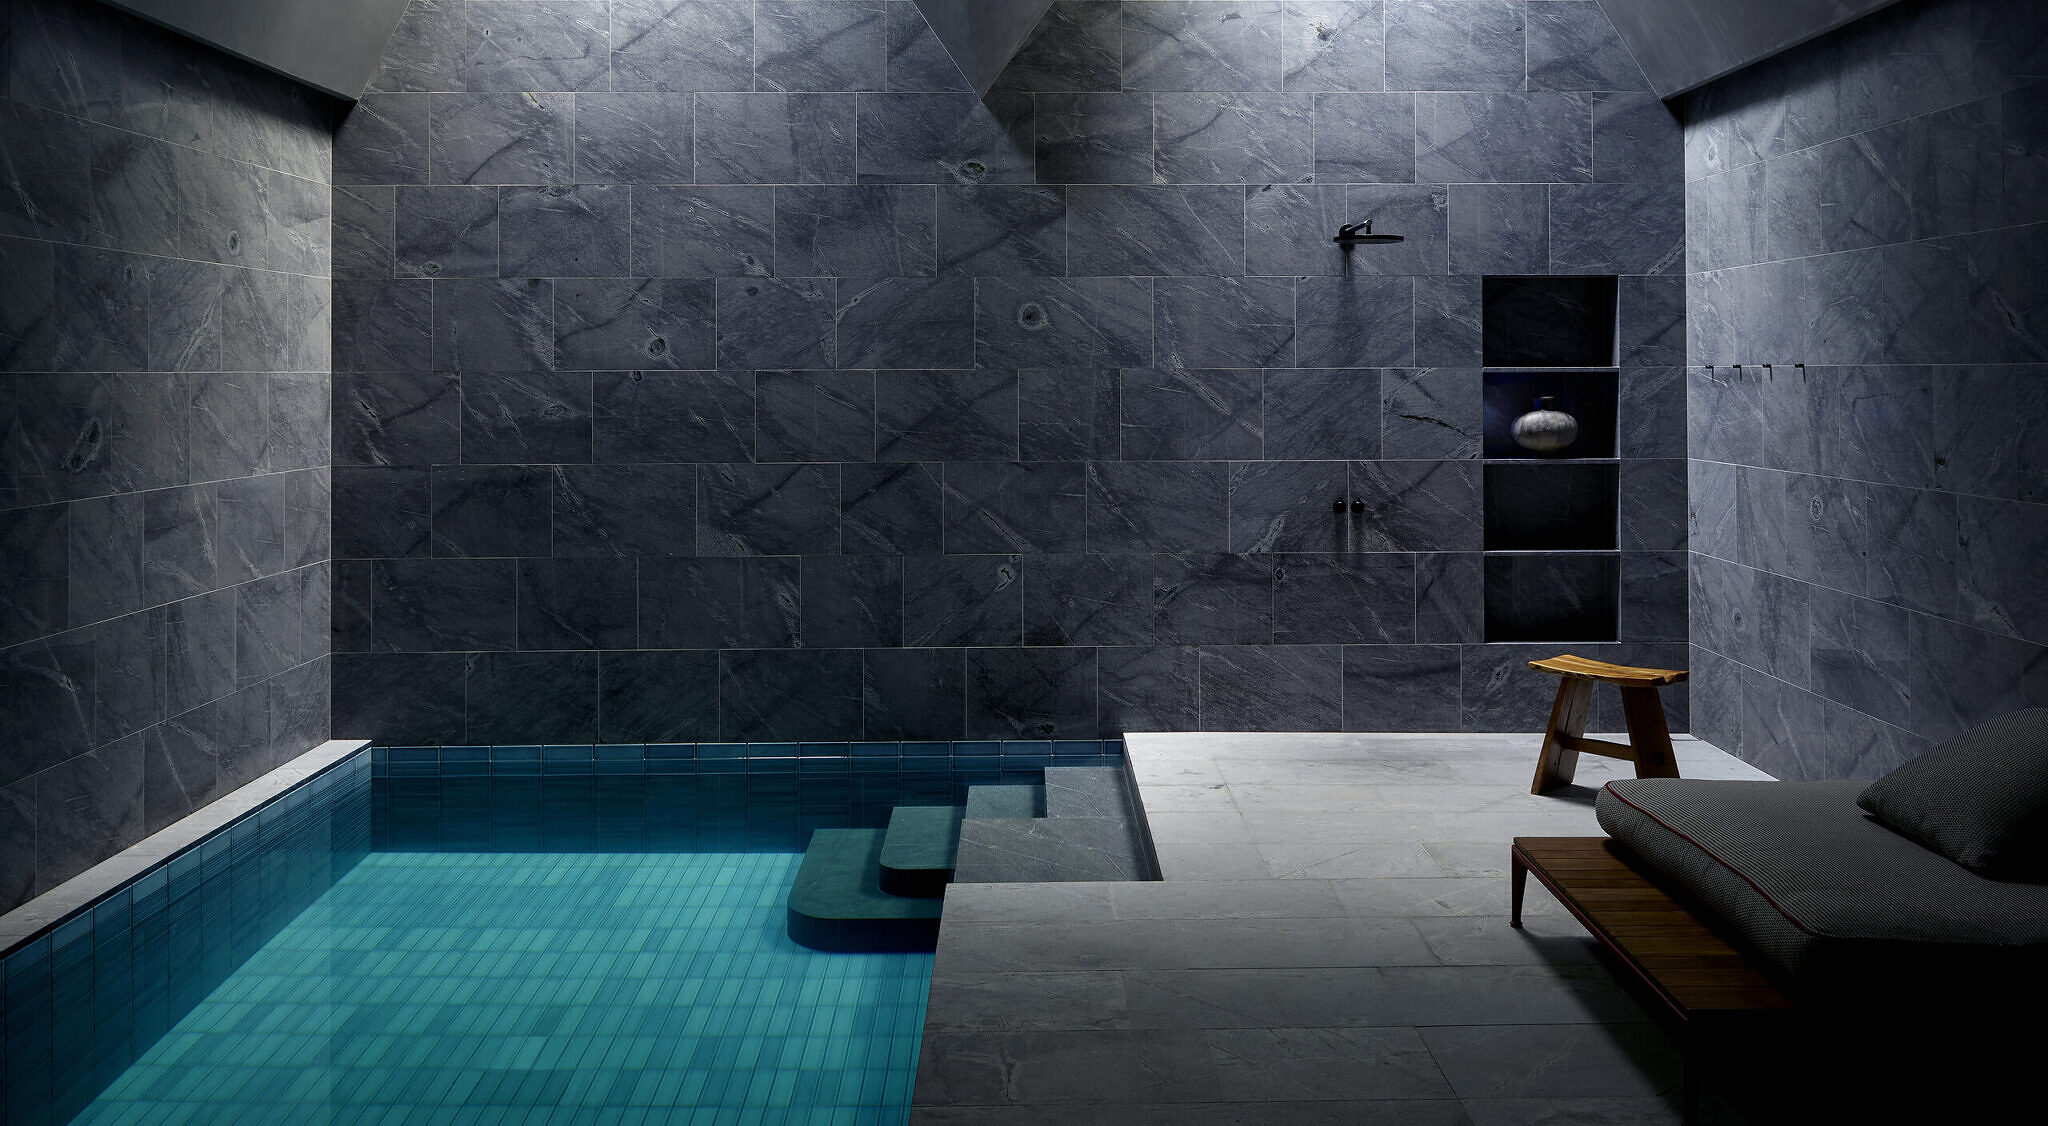 Image of the indoor pool and shower - the walls are grey stone. There is a small wooden chair, as well as a lounge chair on the right side of the image.